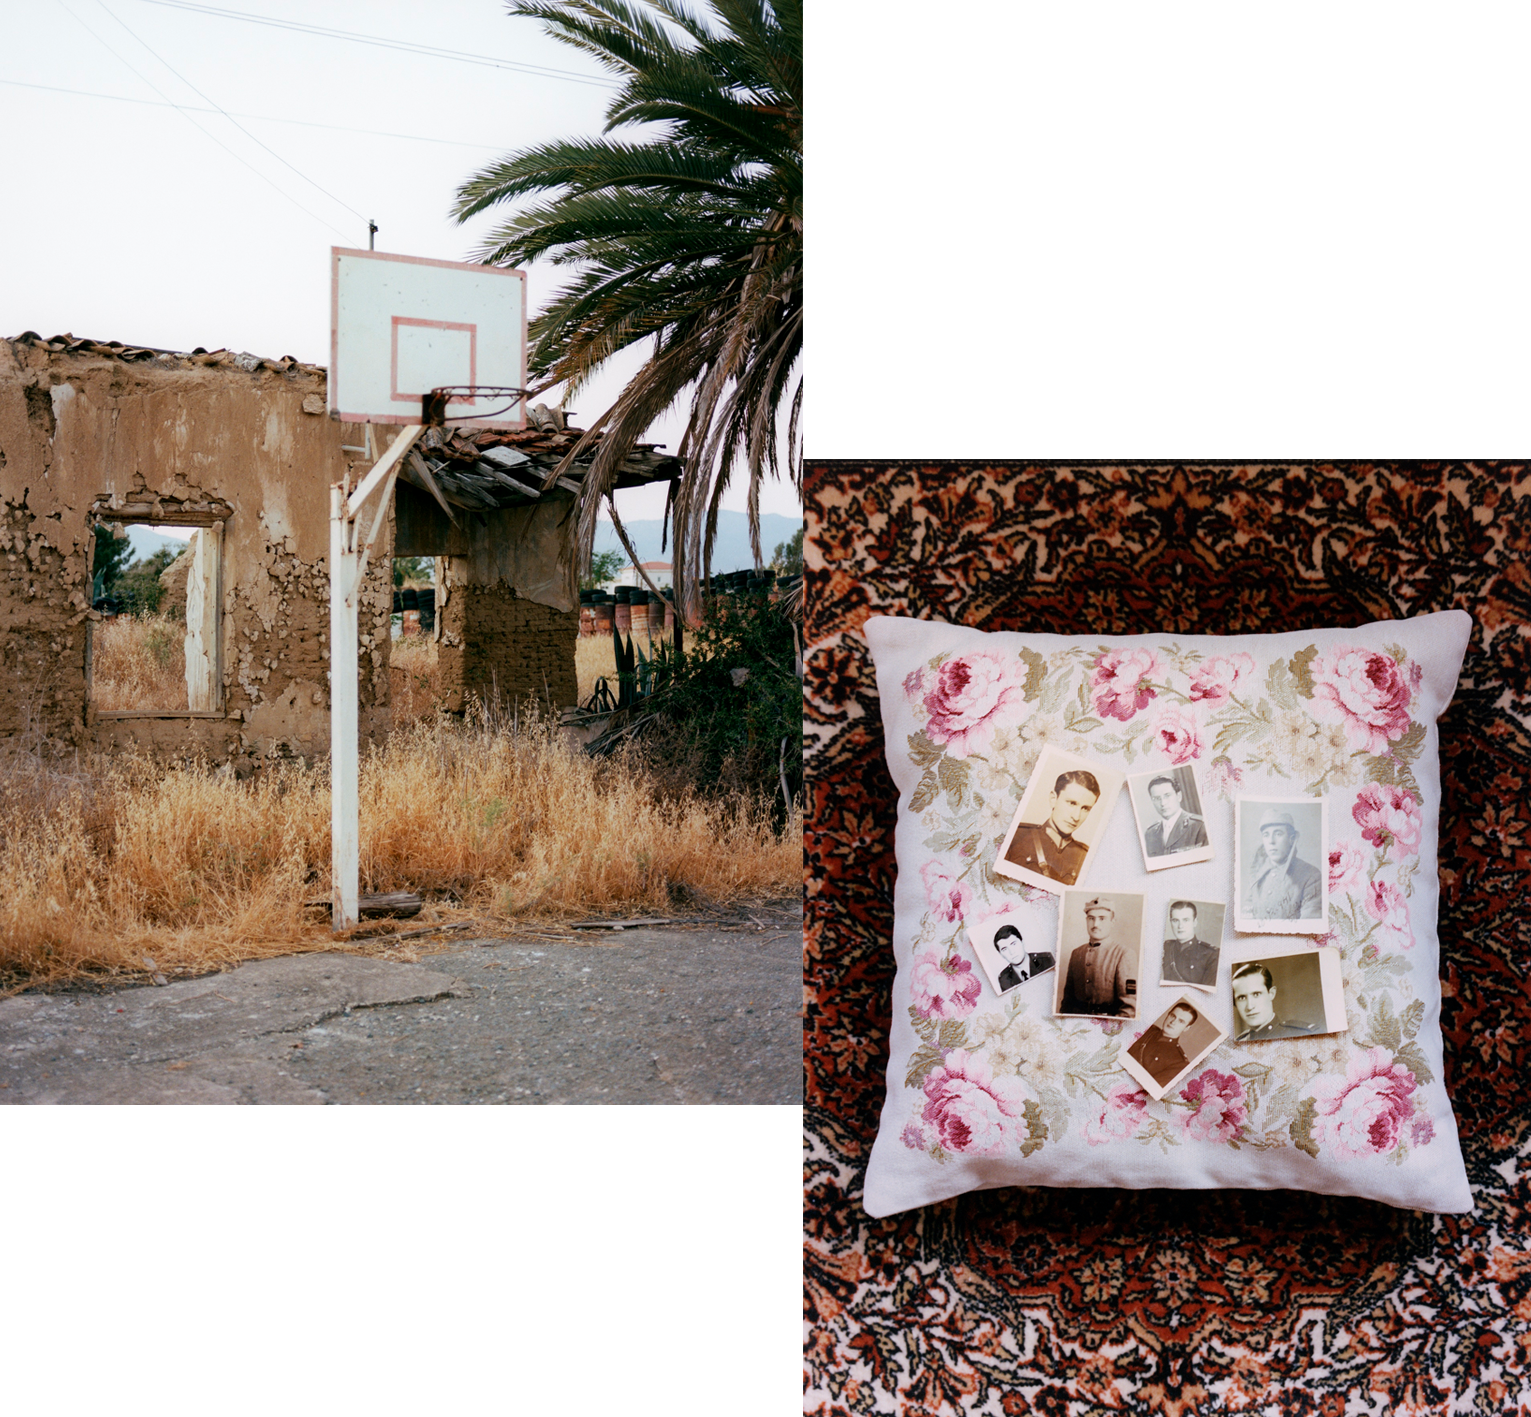 From the series 'Home: leaving one for another' by Olgaç Bozalp